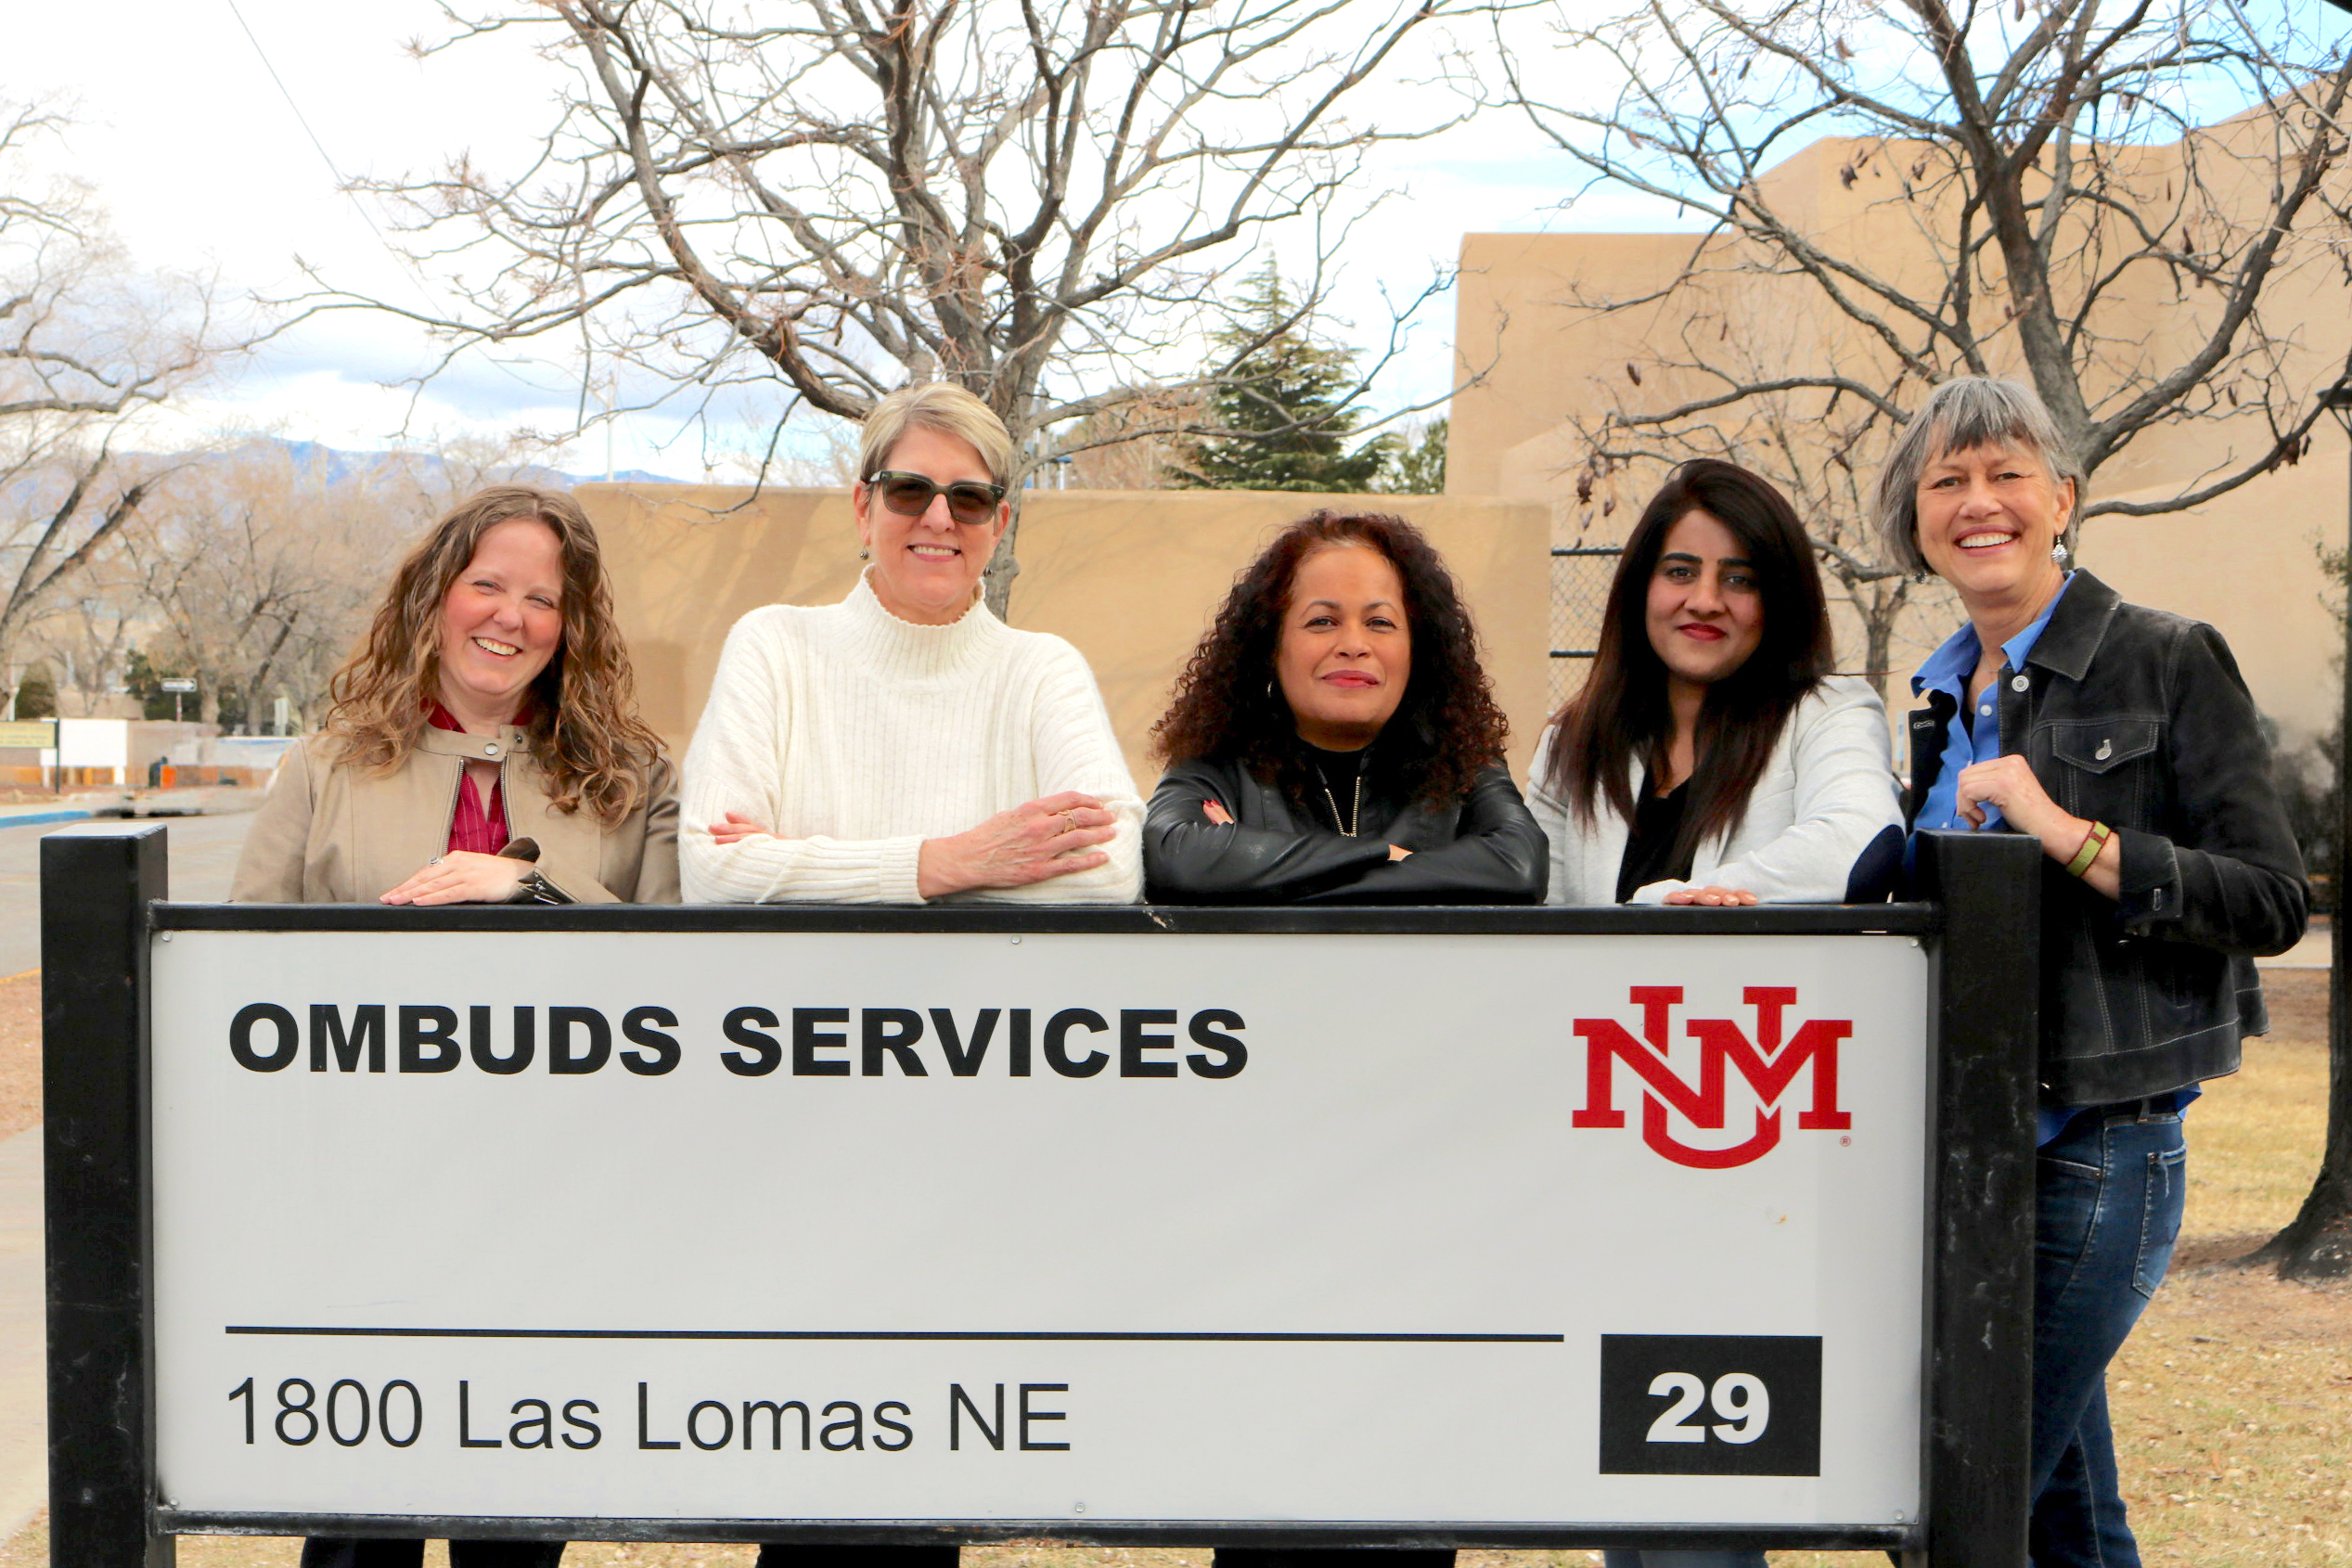 Ombuds Services team standing behind the Ombuds Services building sign